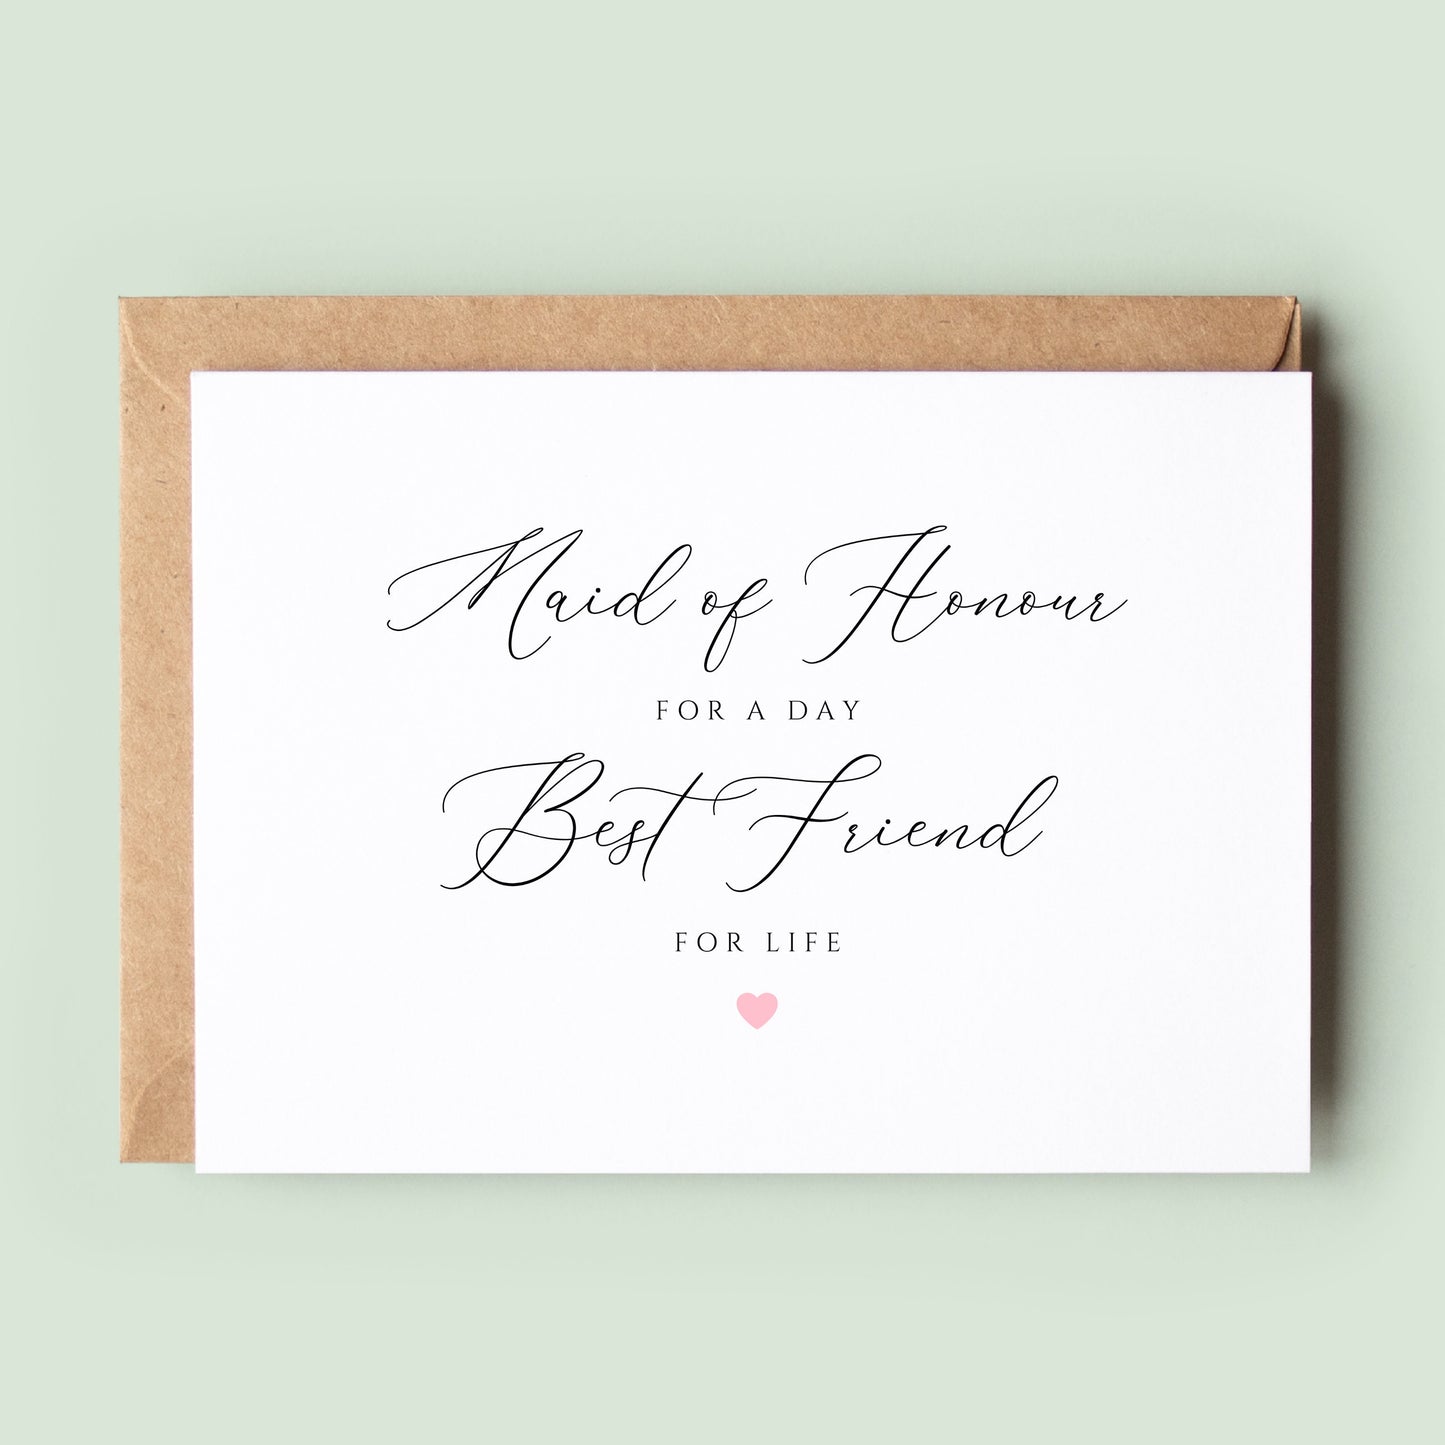 Matron of Honor for a Day, Best Friend for Life, Will You Be My Matron of Honor, Matron of Honor Proposal Card, Matron of Honor Proposal Box